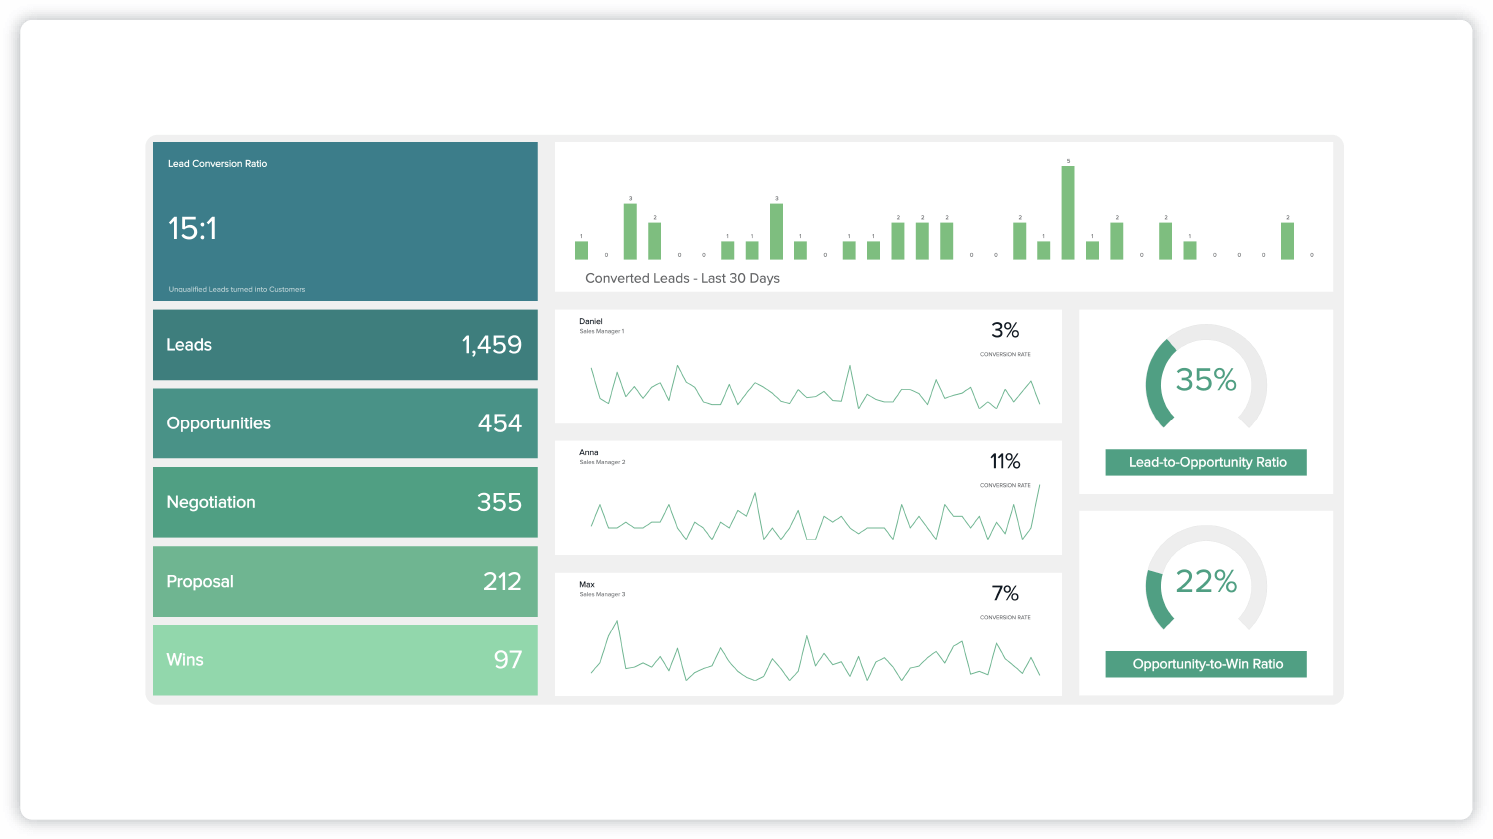 Conversion dashboard examples showing leads, opportunities, negotiation, proposal, and wins. Ratios, bar charts, and progress bars about lead-to-opportunity ratios and opportunity-to-win ratios.